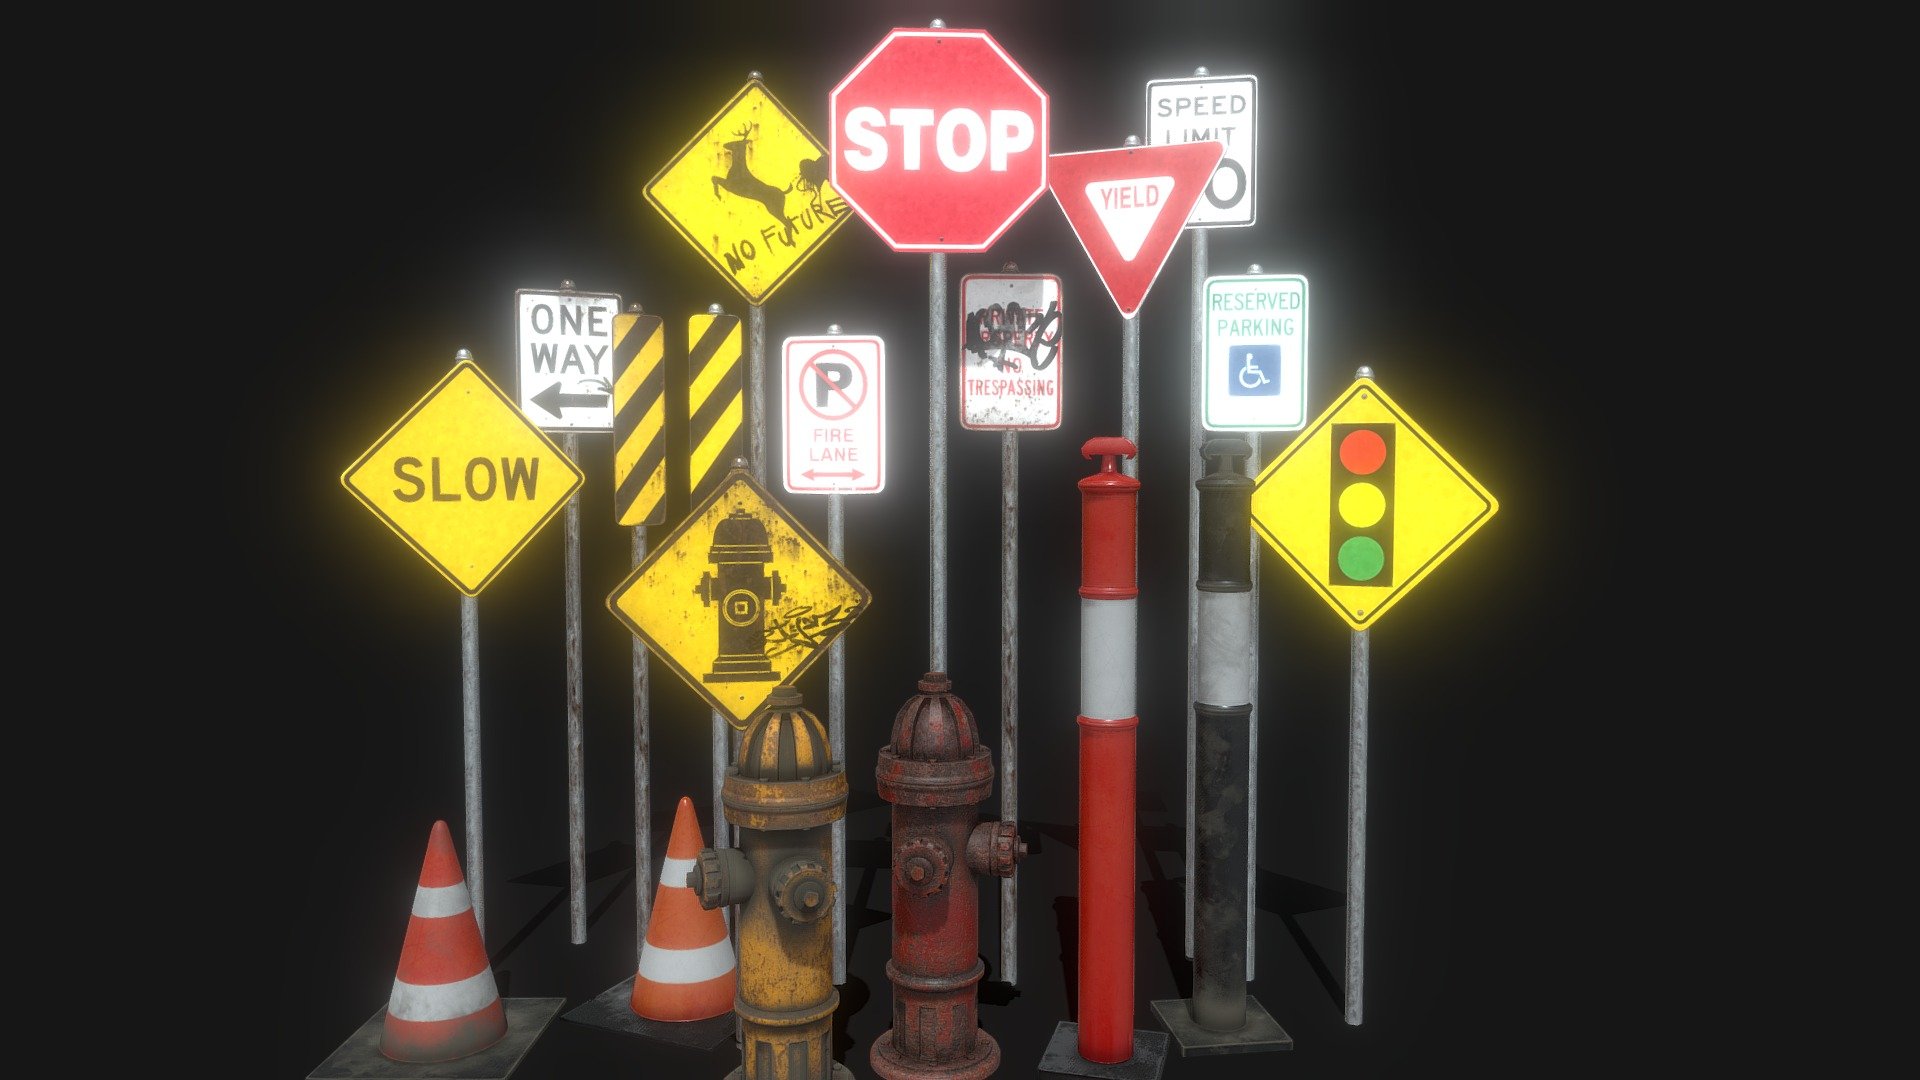 A package of fire hydrants, pylons, and road signs!

Designed for games in Low-poly PBR including Albedo, Normal, Metallic, AO, and Roughness textures.
Signs share one 4K Texture map, Pylons and Hydrant share one 2K Texture map.

118 Triangles (One Sign)
5793 Triangles (Pylons + Fire Hydrant) 3d model